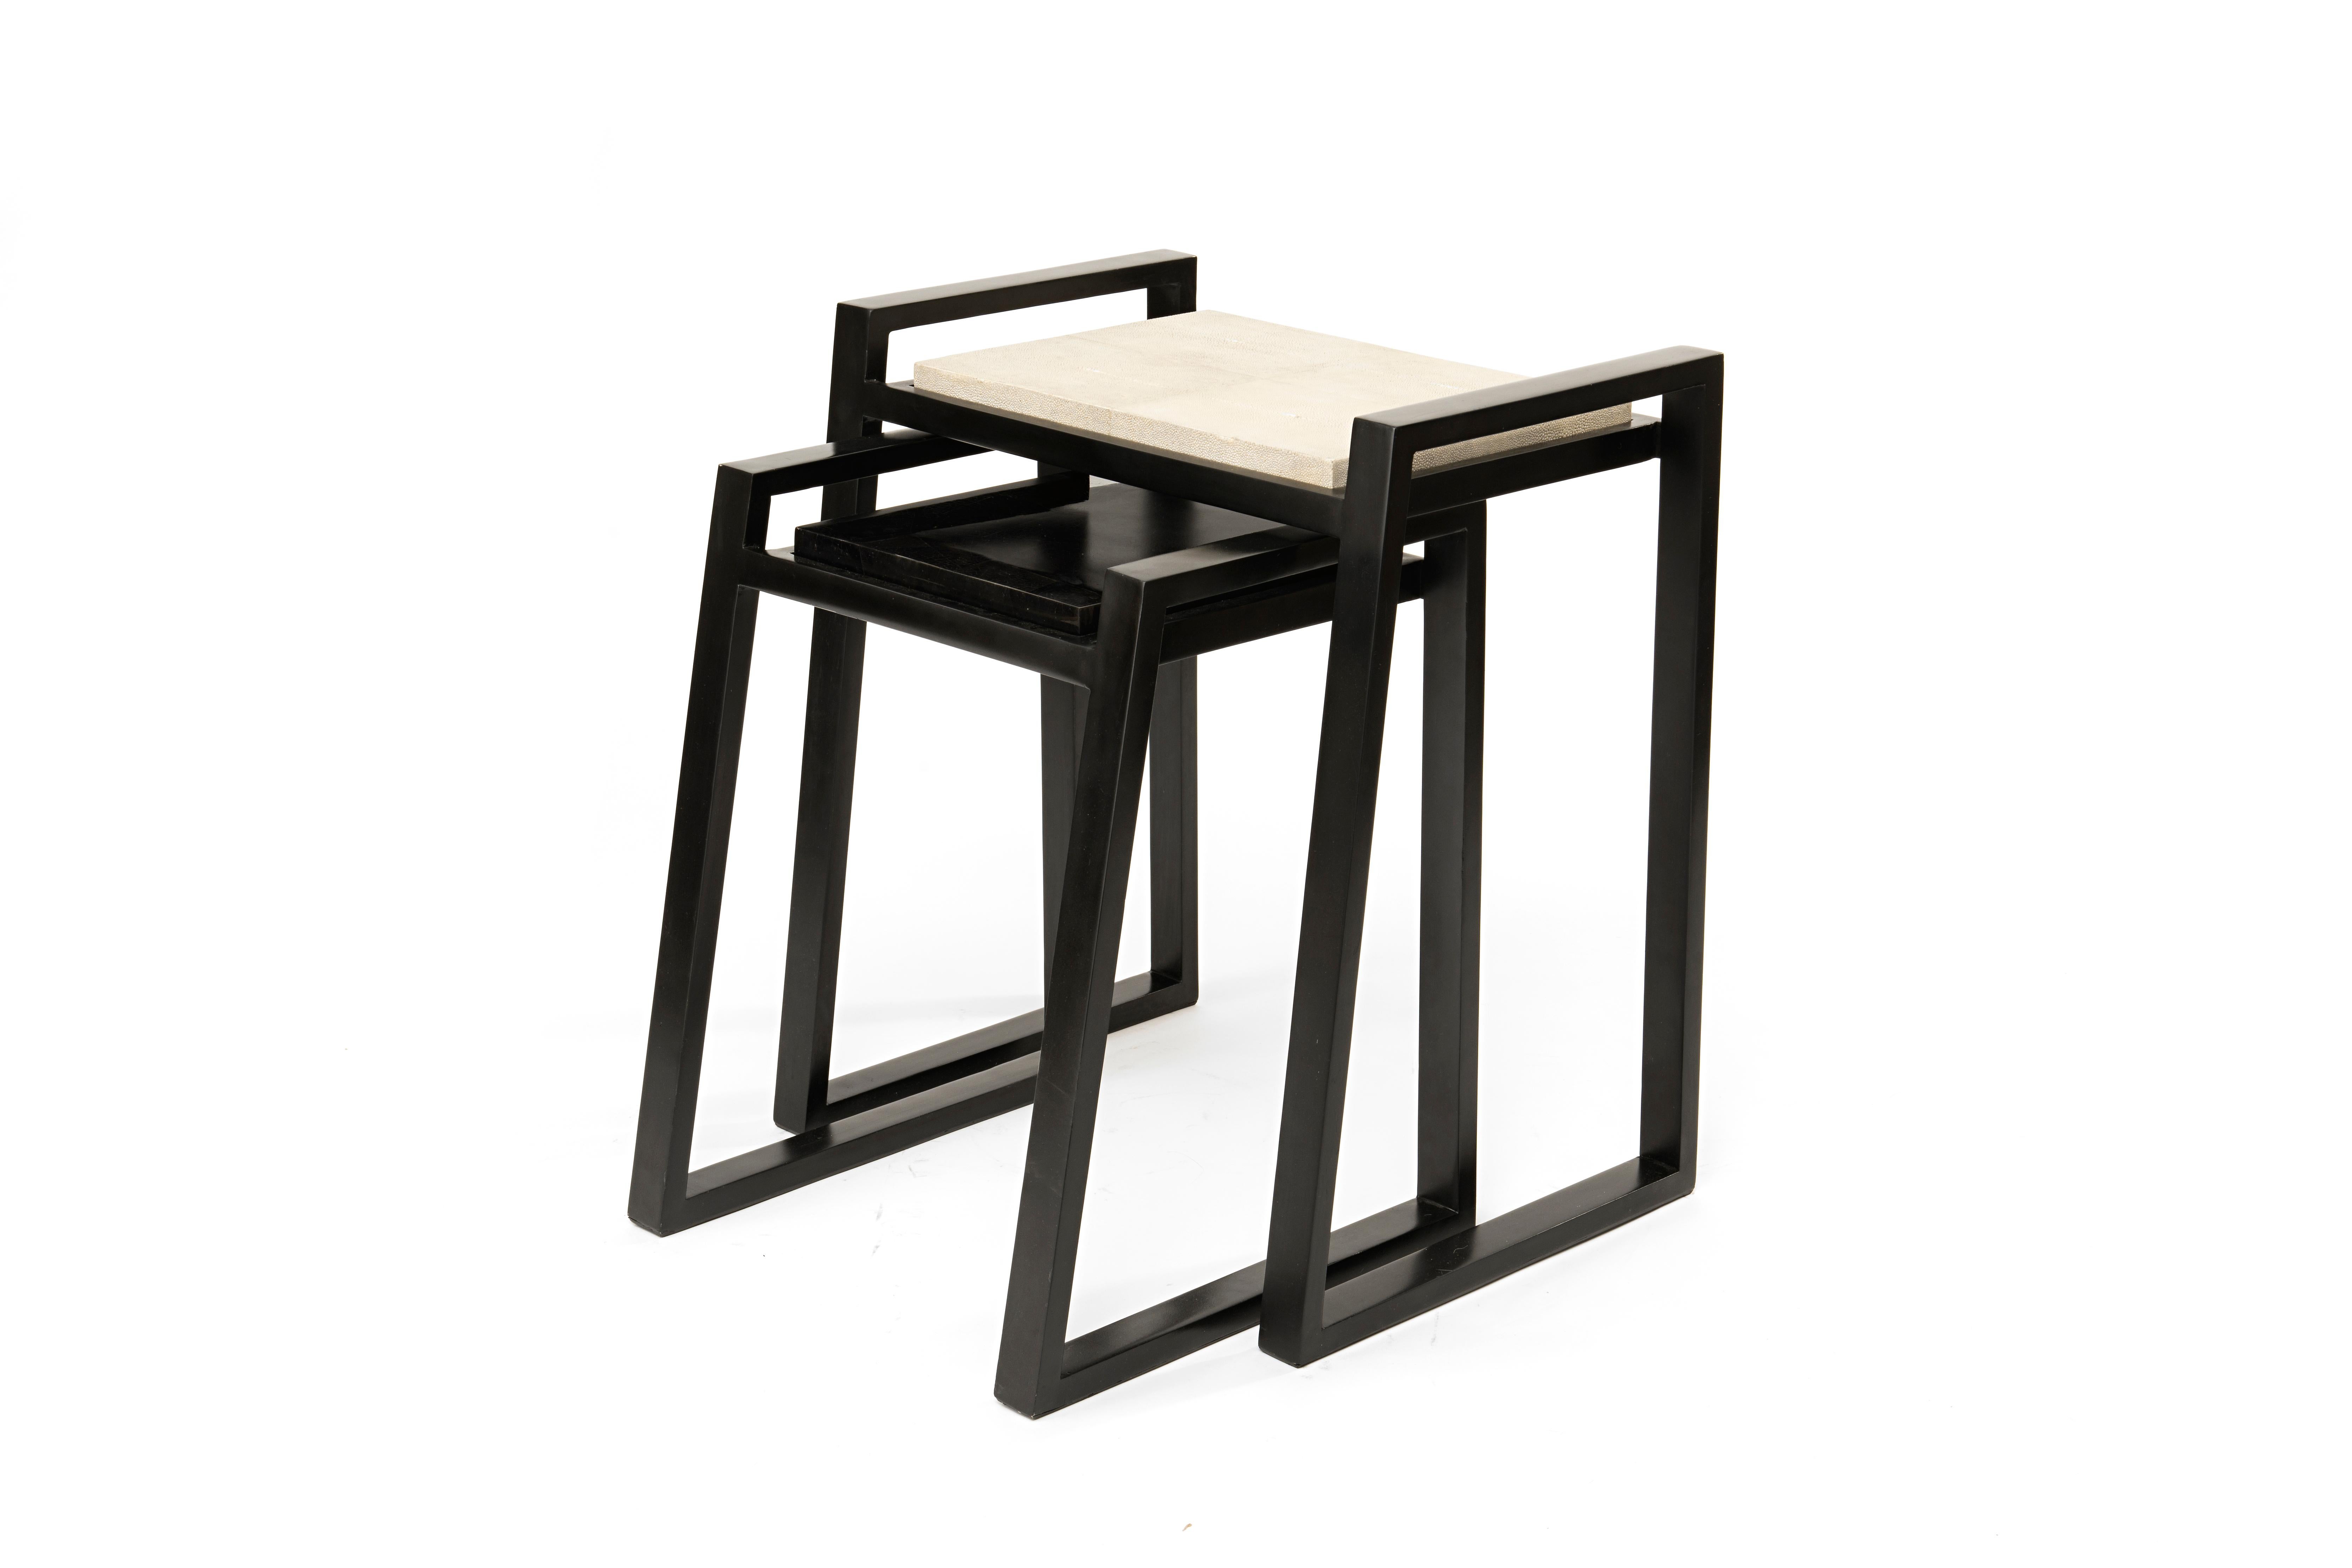 The set of 2 nesting game tables by Kifu Paris is the perfect multi-functional luxury piece. The sleek and geometric tables can be used for backgammon or chess, and can be reversed to provide a flat surface. The tops are also removable to be used as